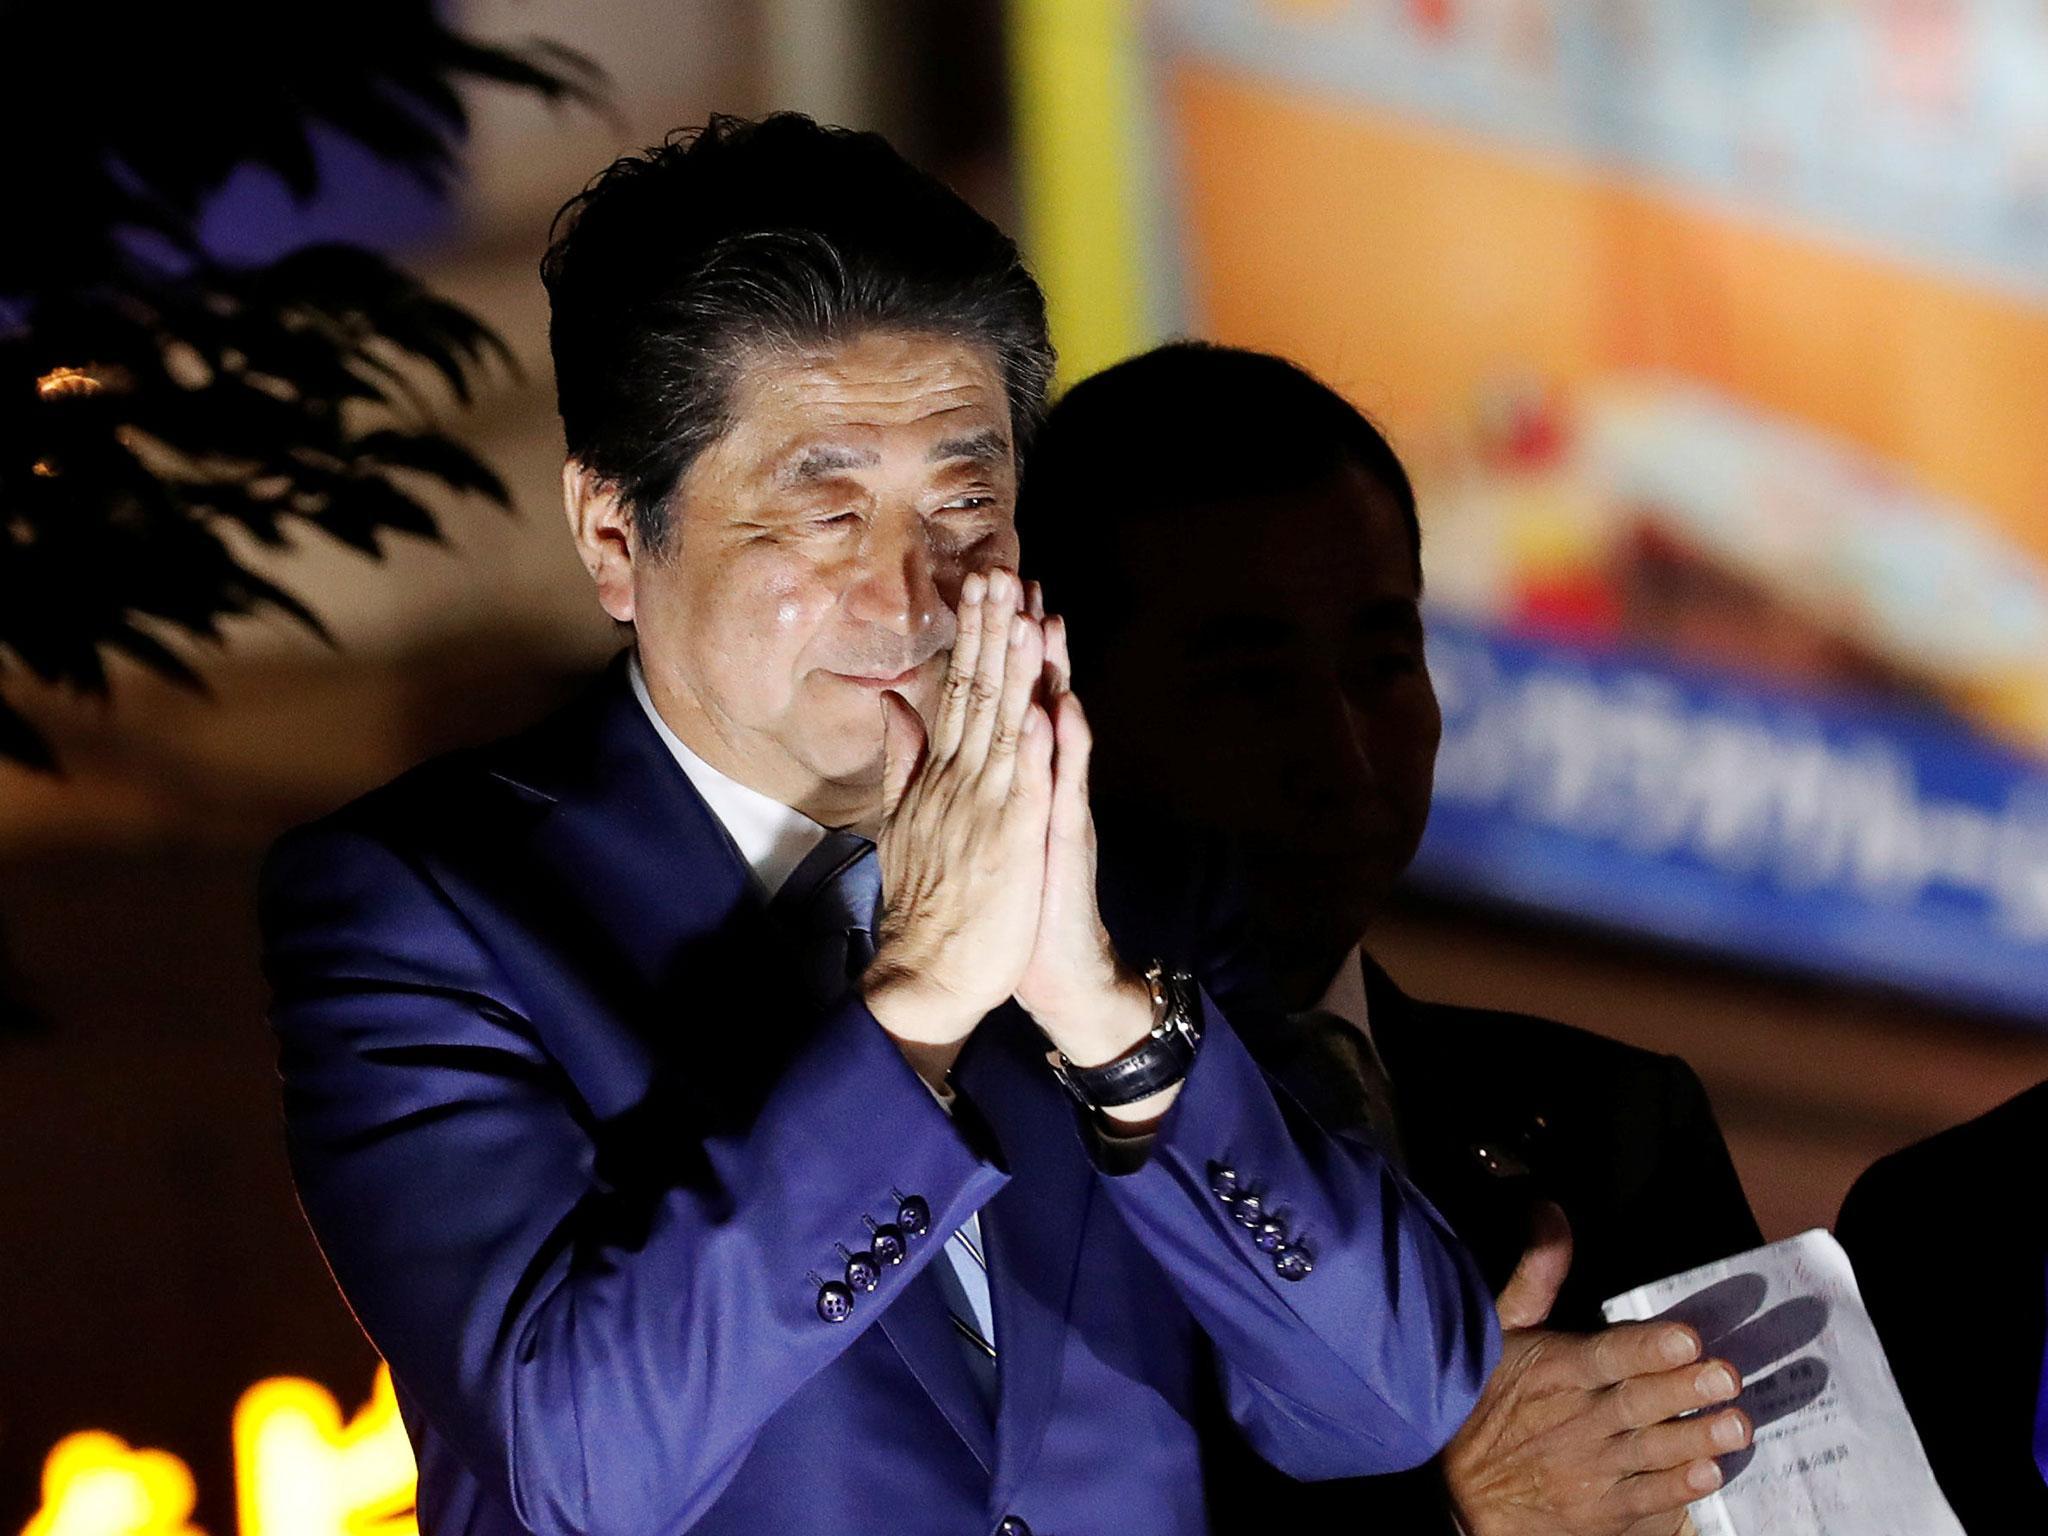 Japan's Prime Minister Shinzo Abe has led the Liberal Democratic Party to election victory